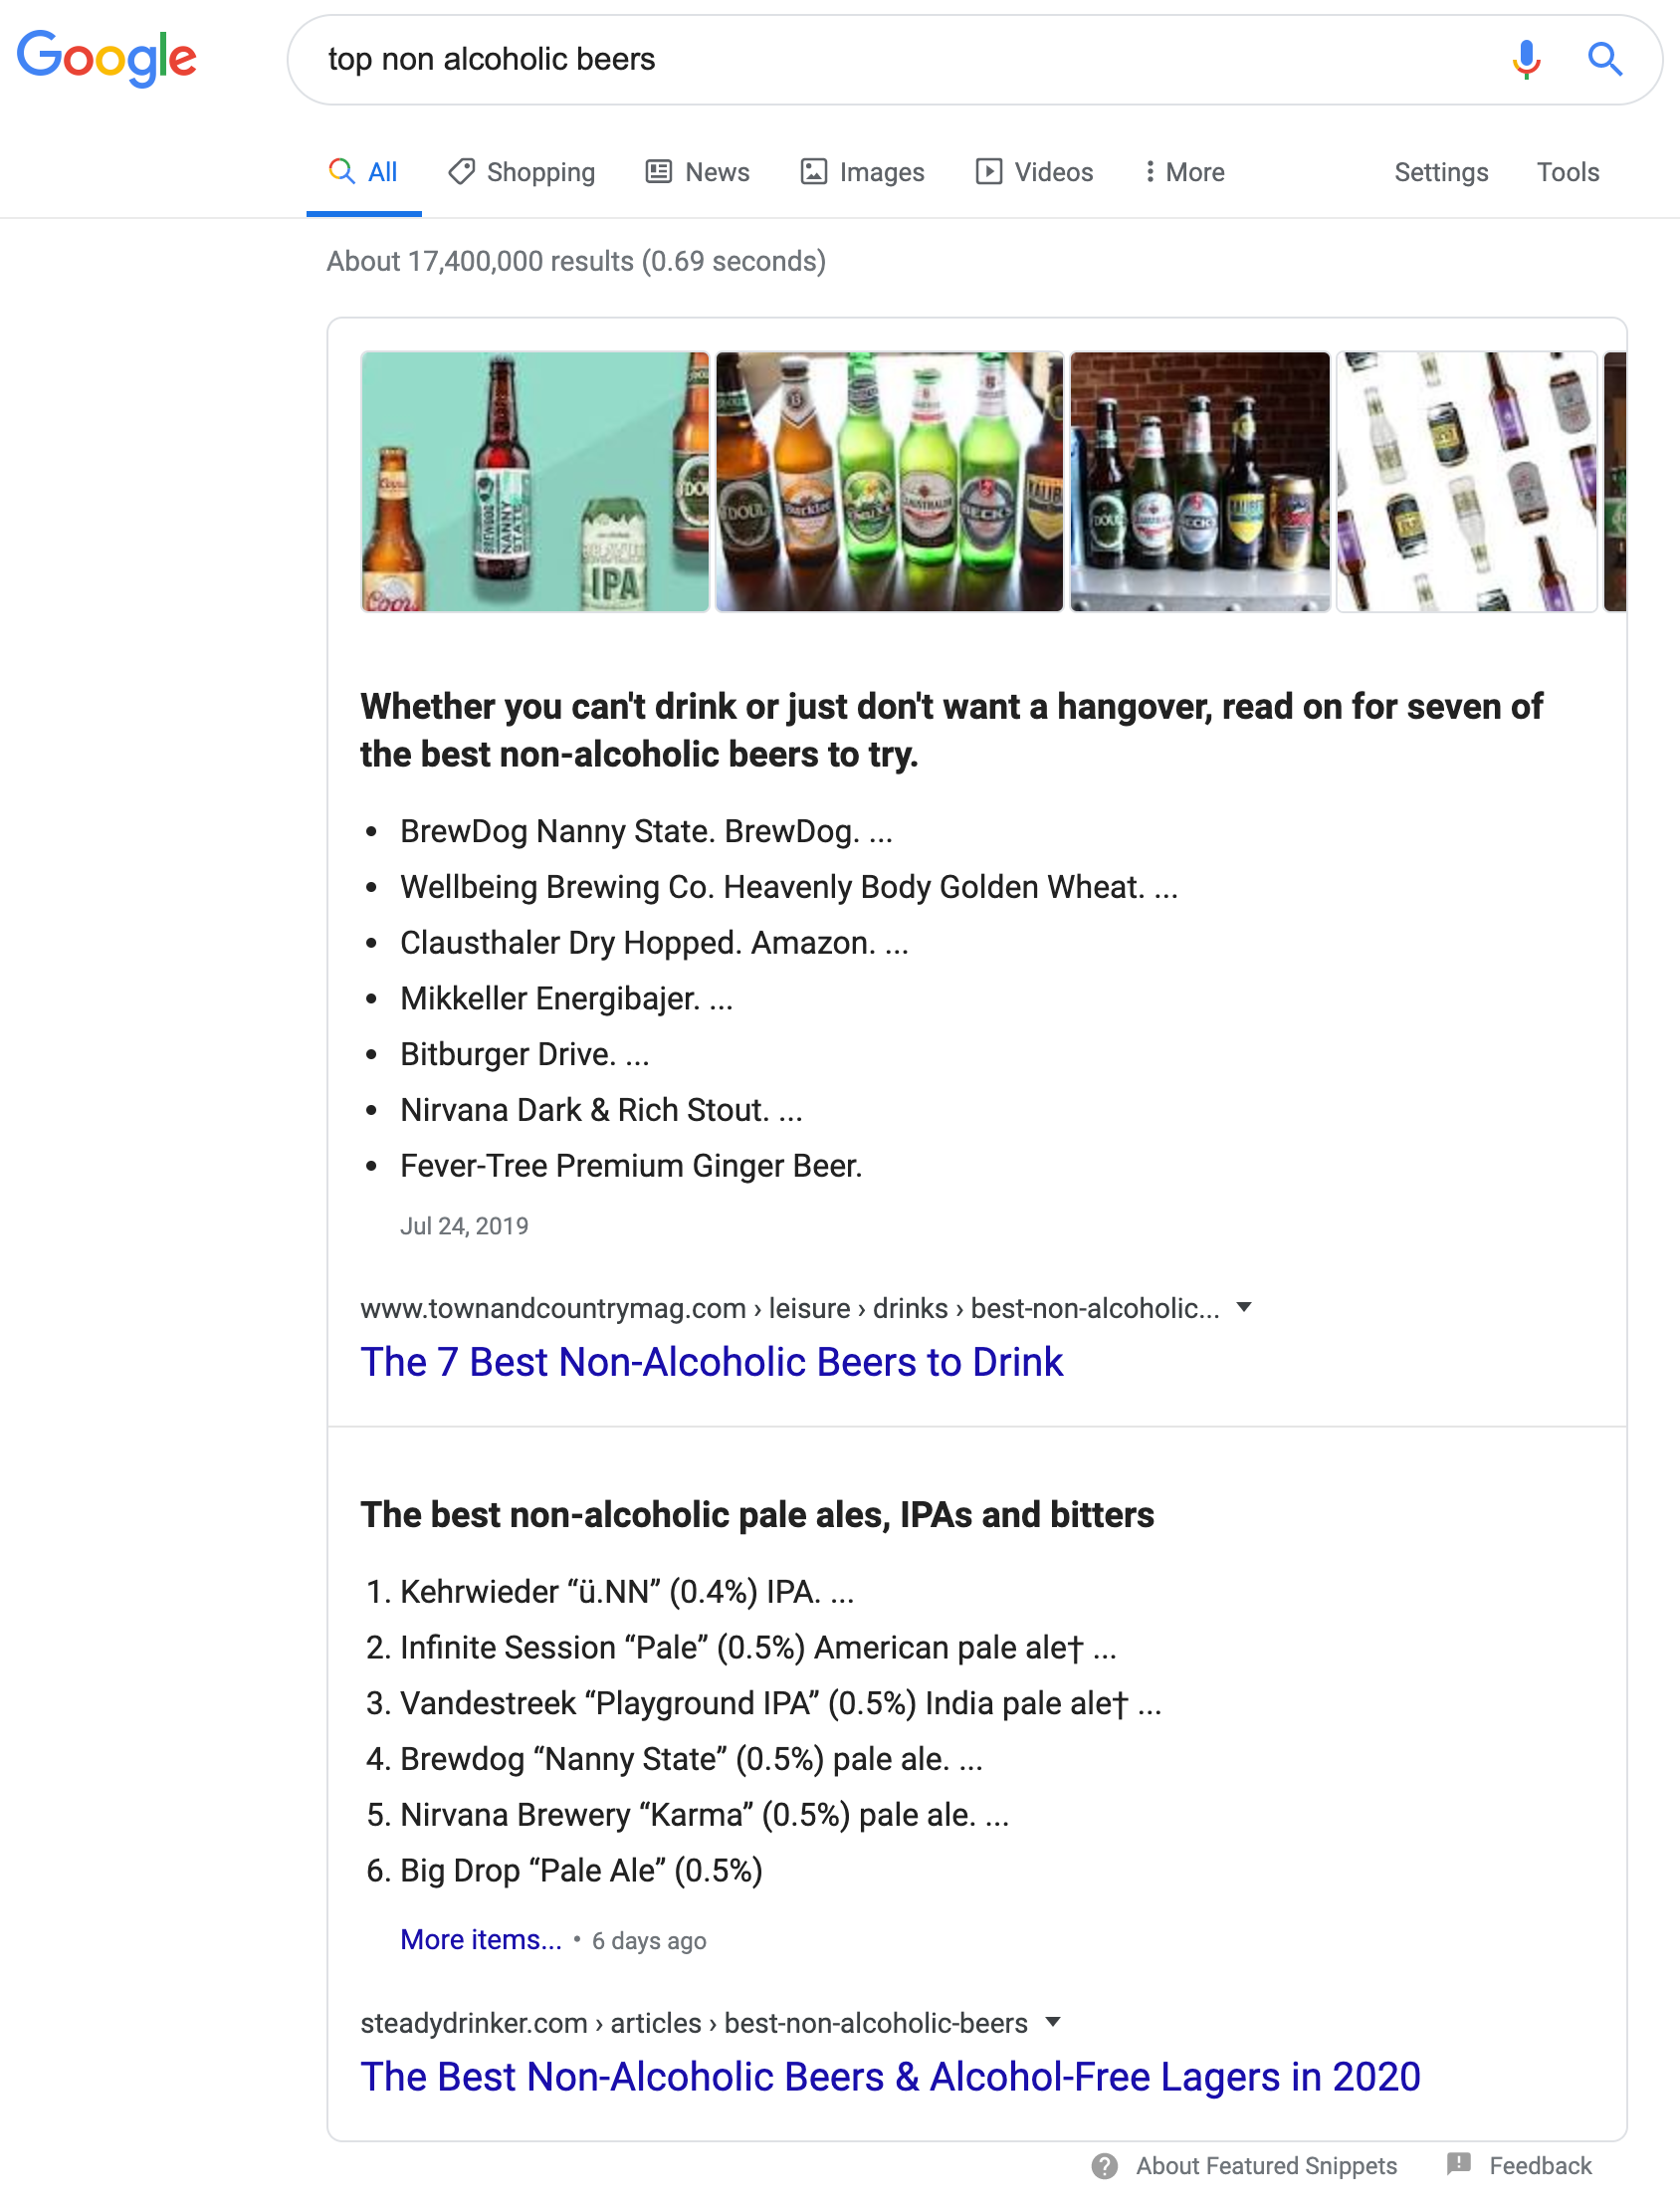 top non alcoholic beers - Google Search